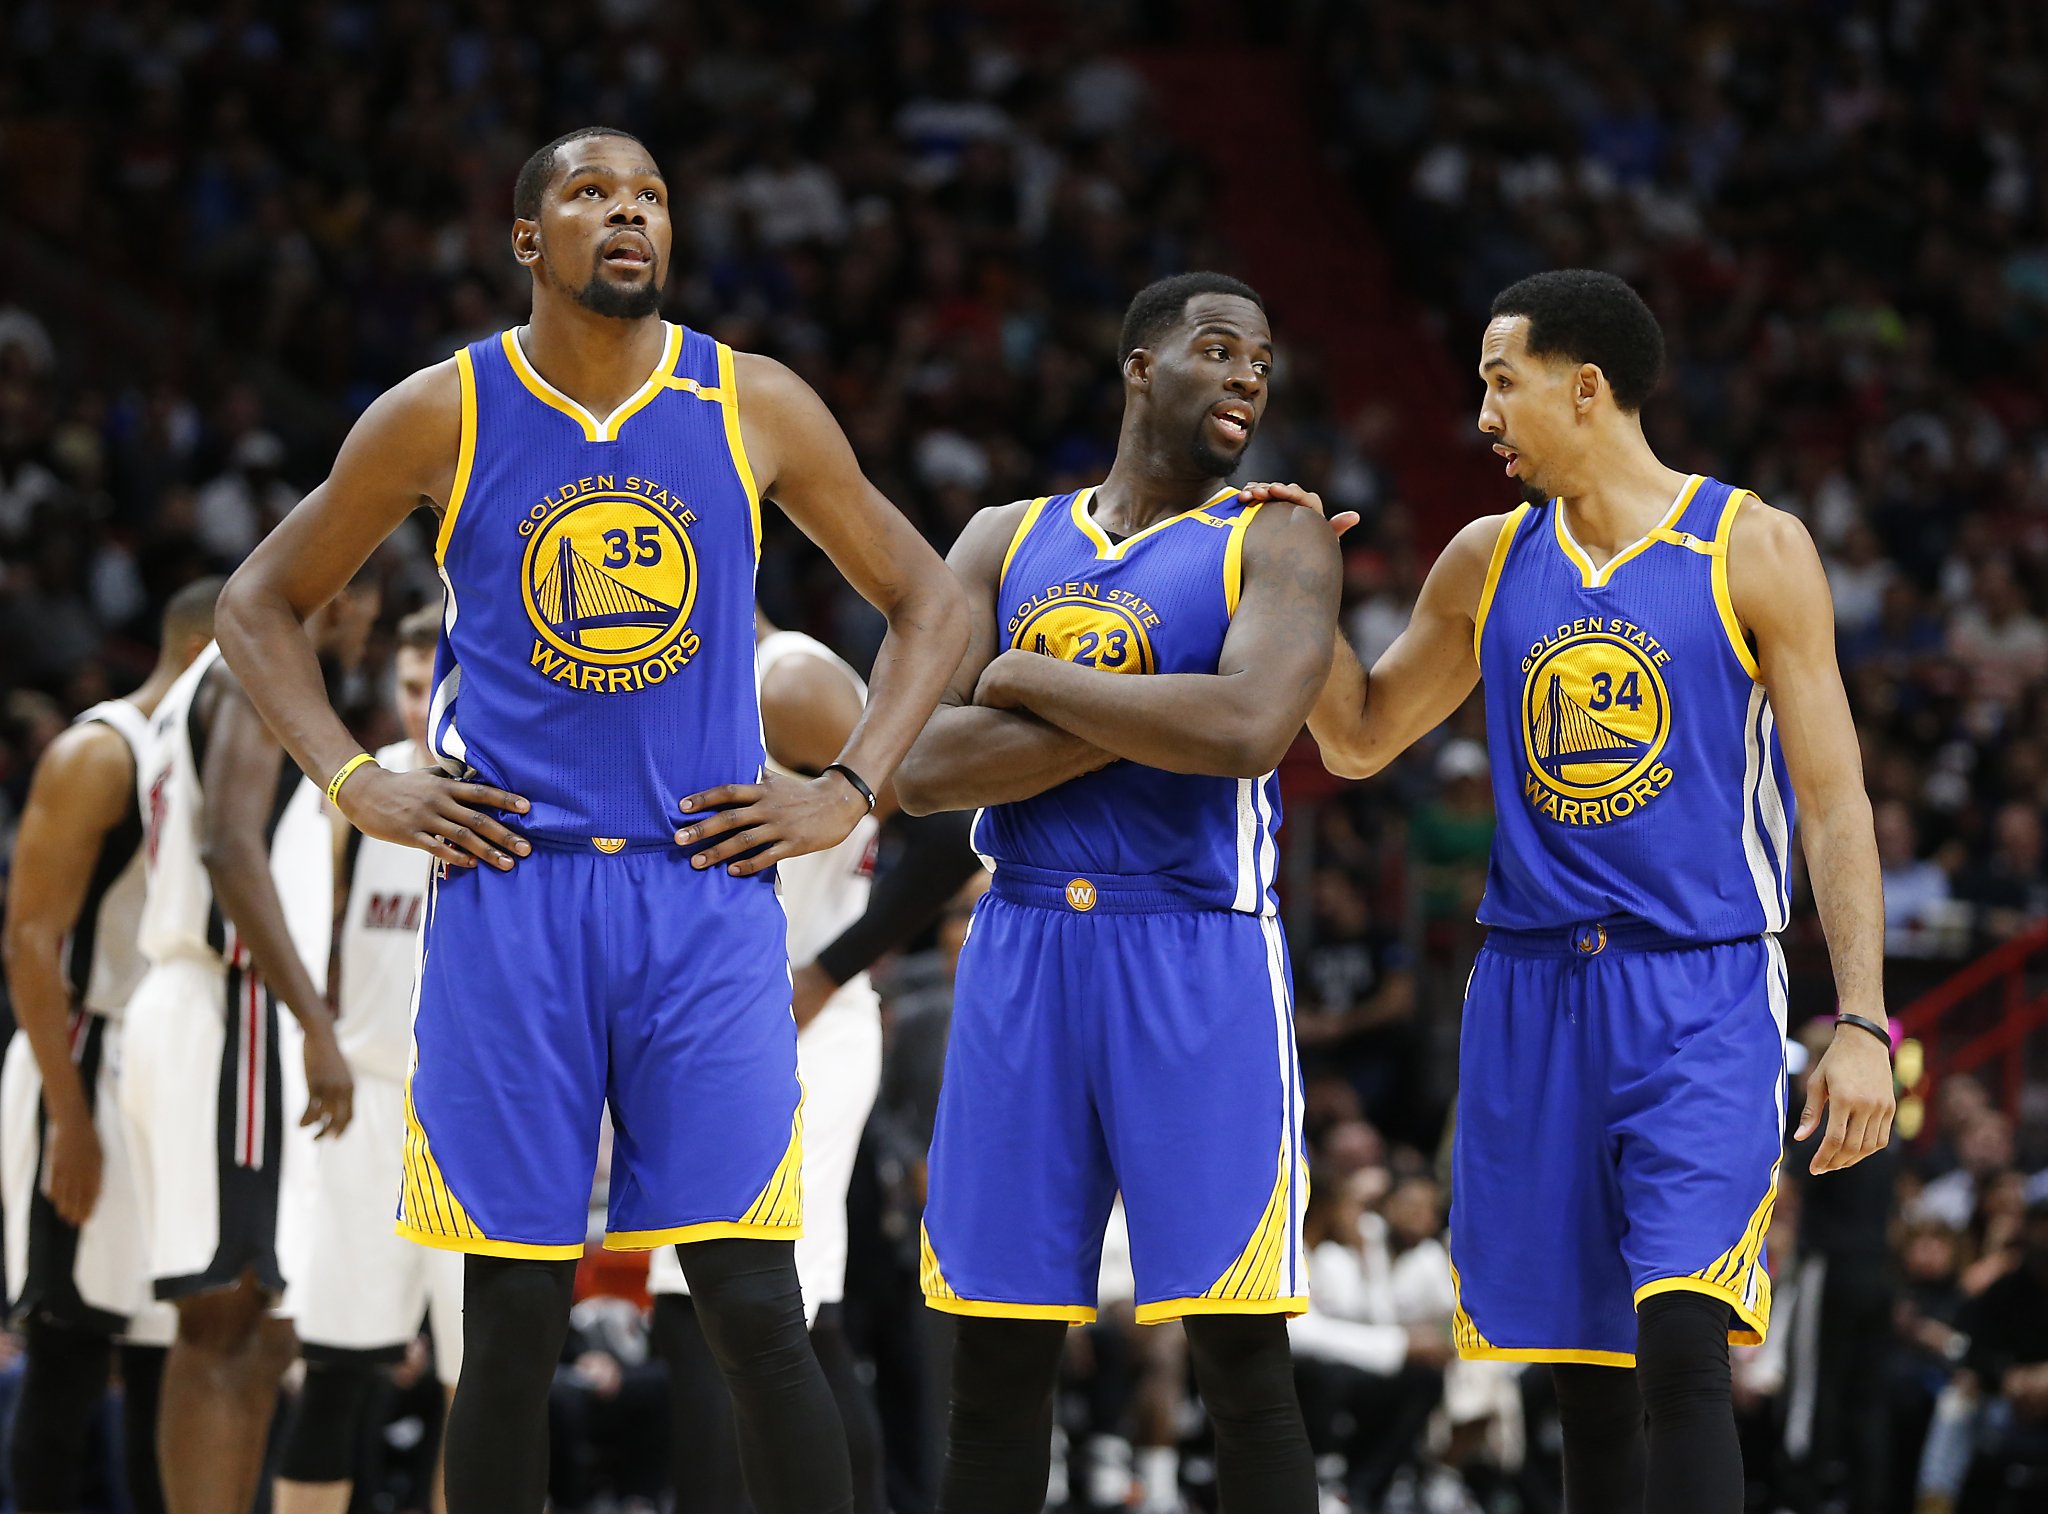 Draymond Green admits being 'upset' at Kevin Durant over Warriors